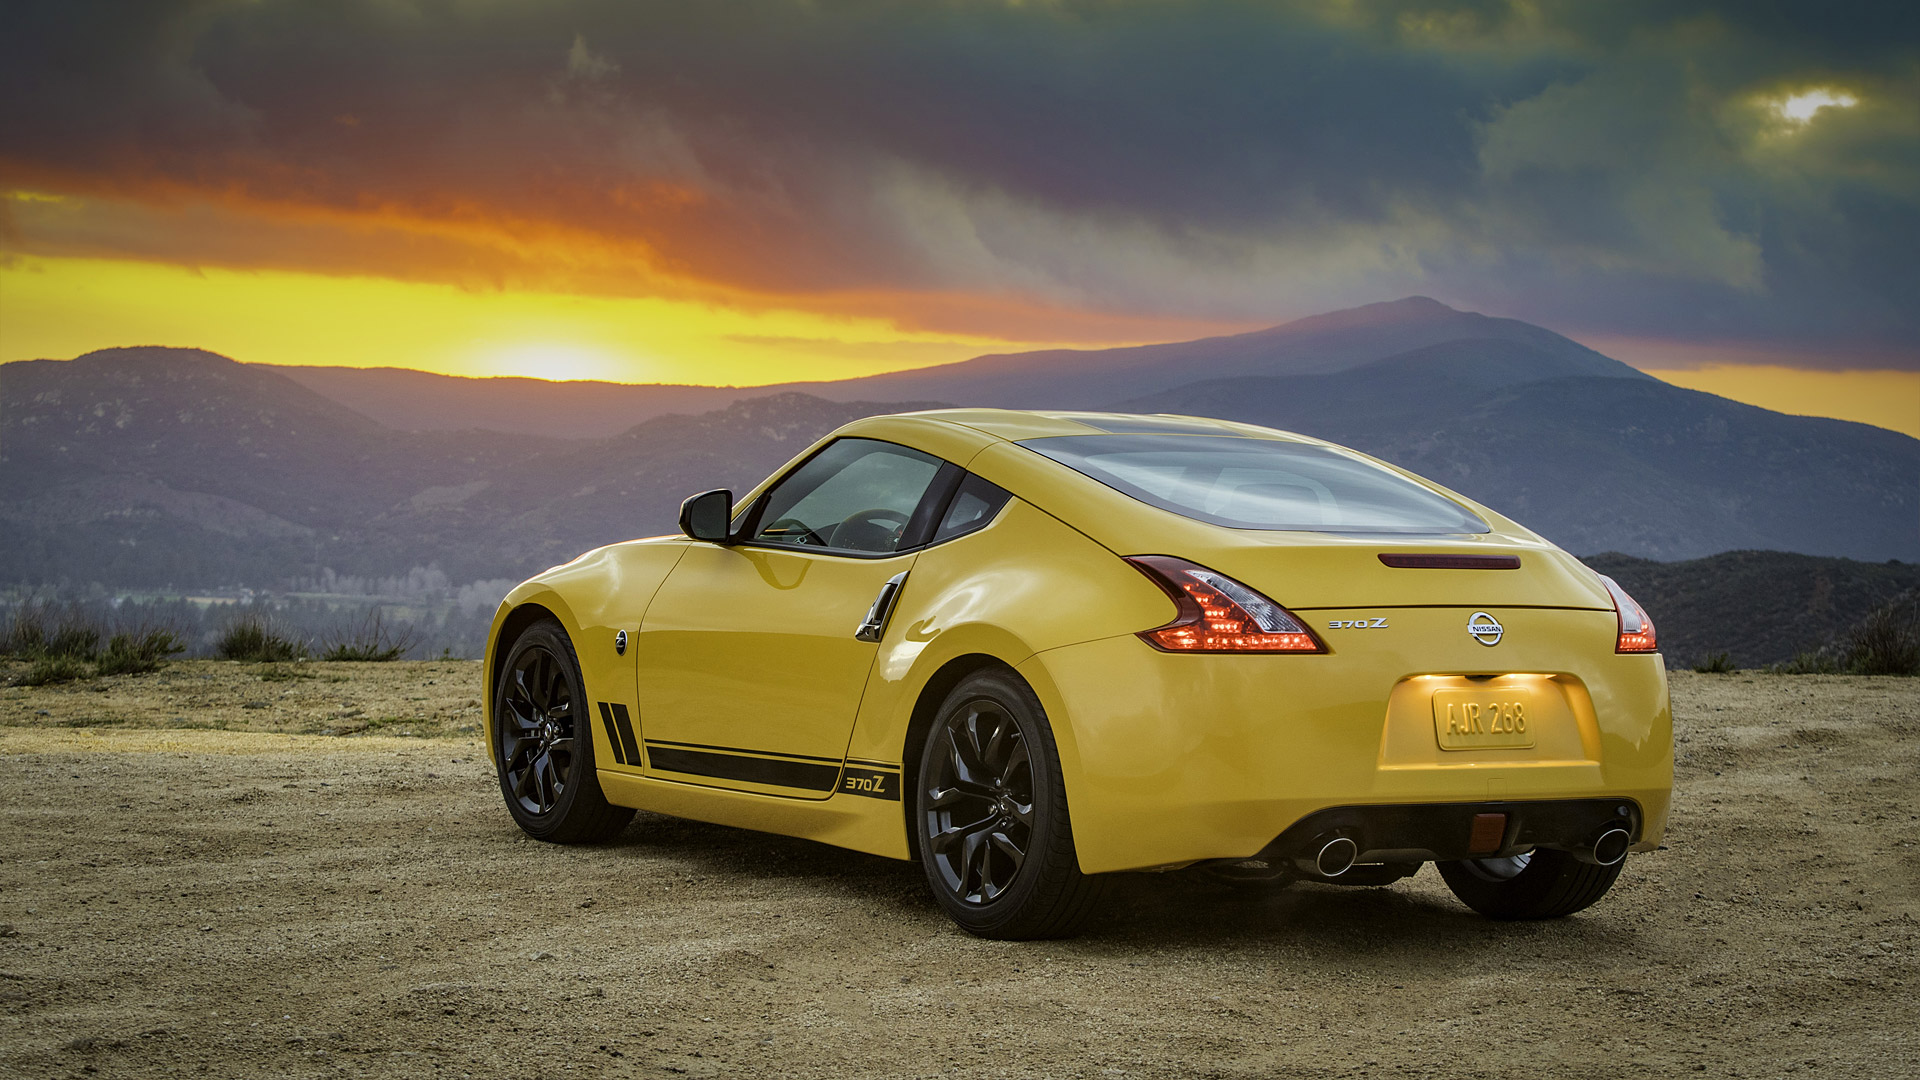 Nissan 370z Heritage Edition Wallpaper HD Image Wsupercars